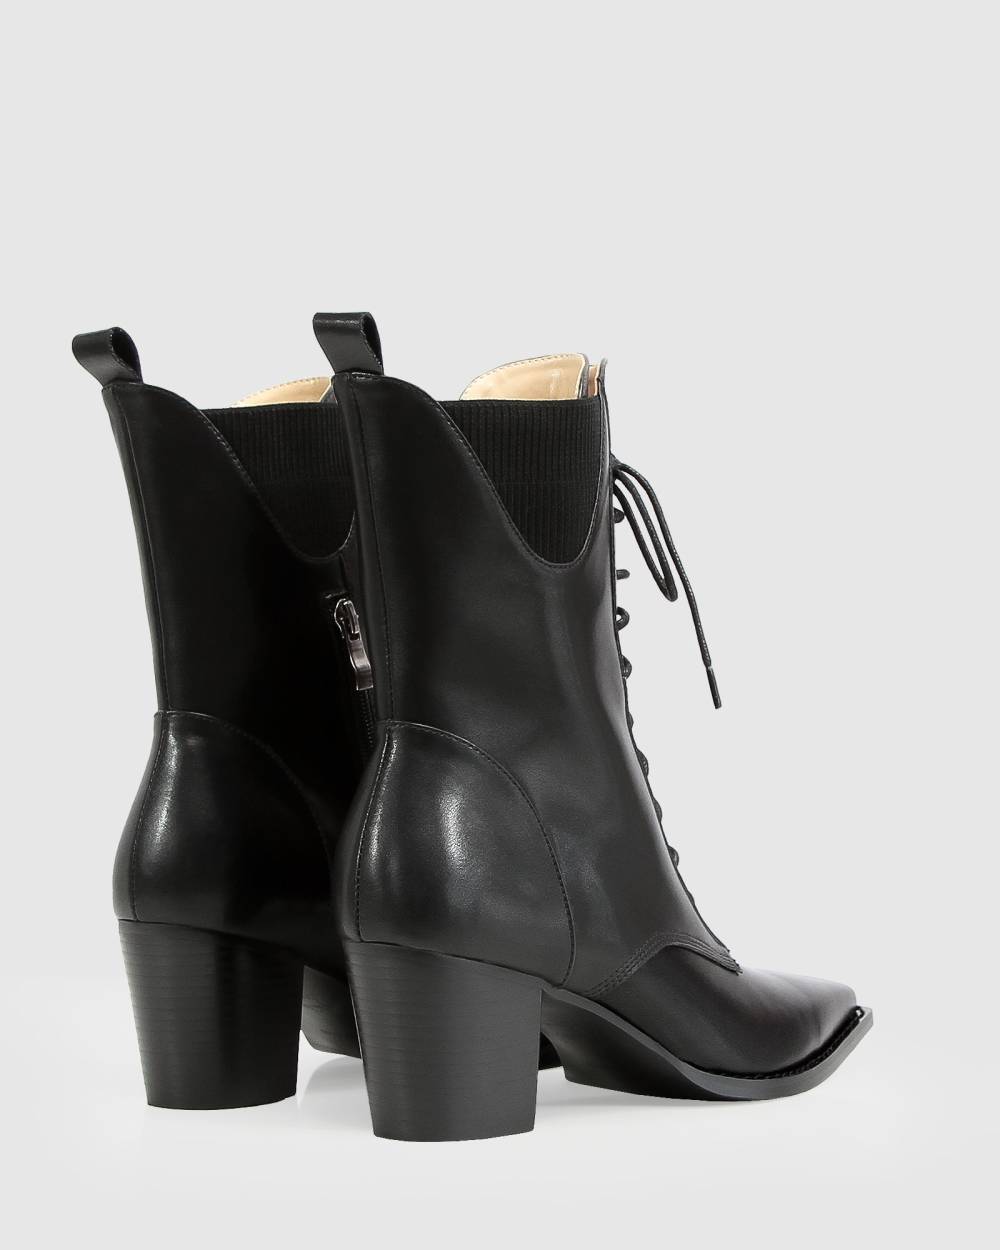 Belle & Bloom Jumping Ship Laced Boot - Reitmans